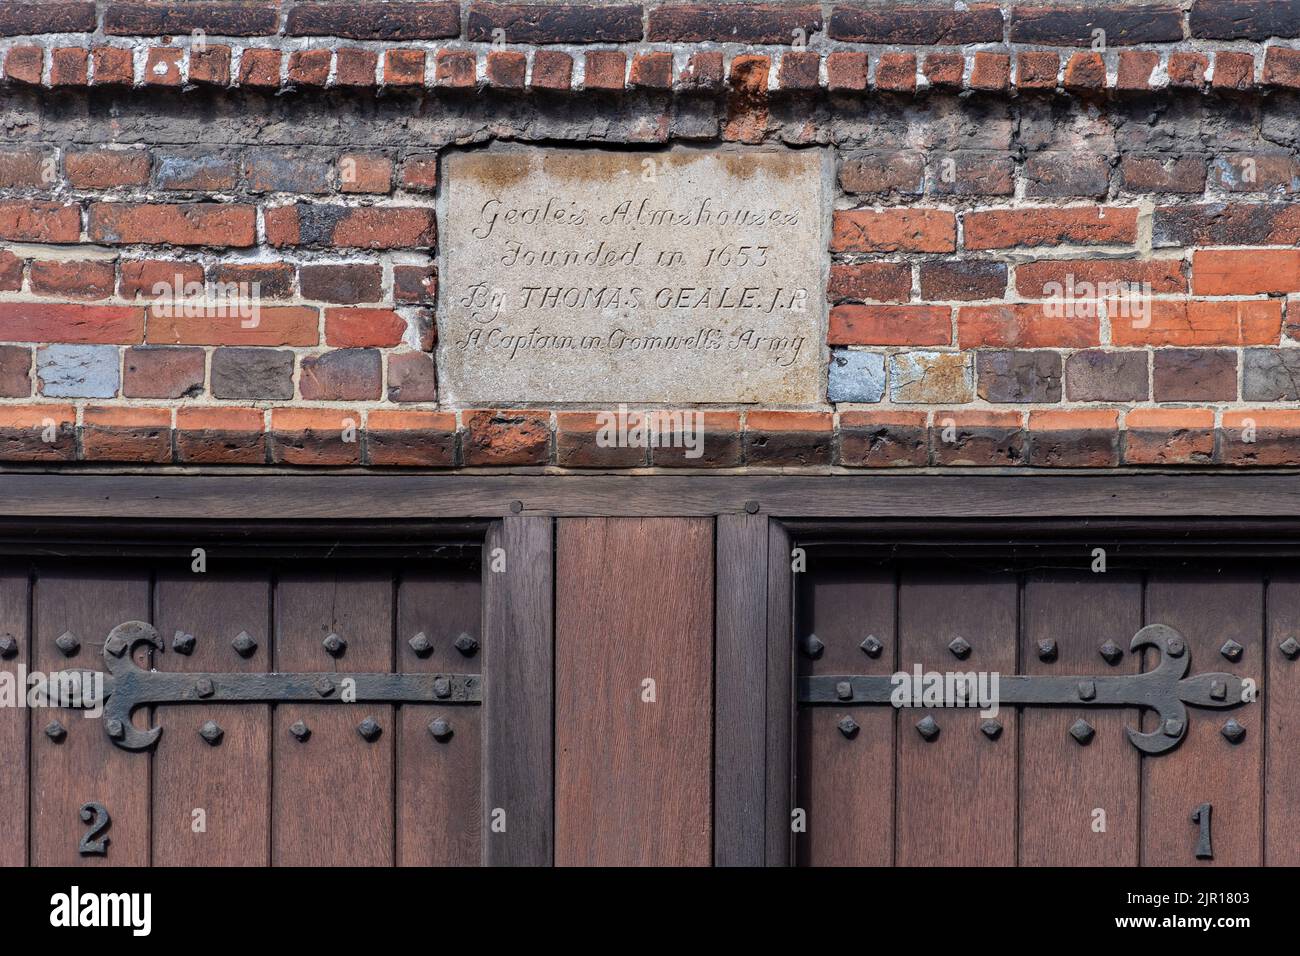 Geale's Almshouses founded in 1653, on Church Street in Alton, a market town in Hampshire, England, UK Stock Photo